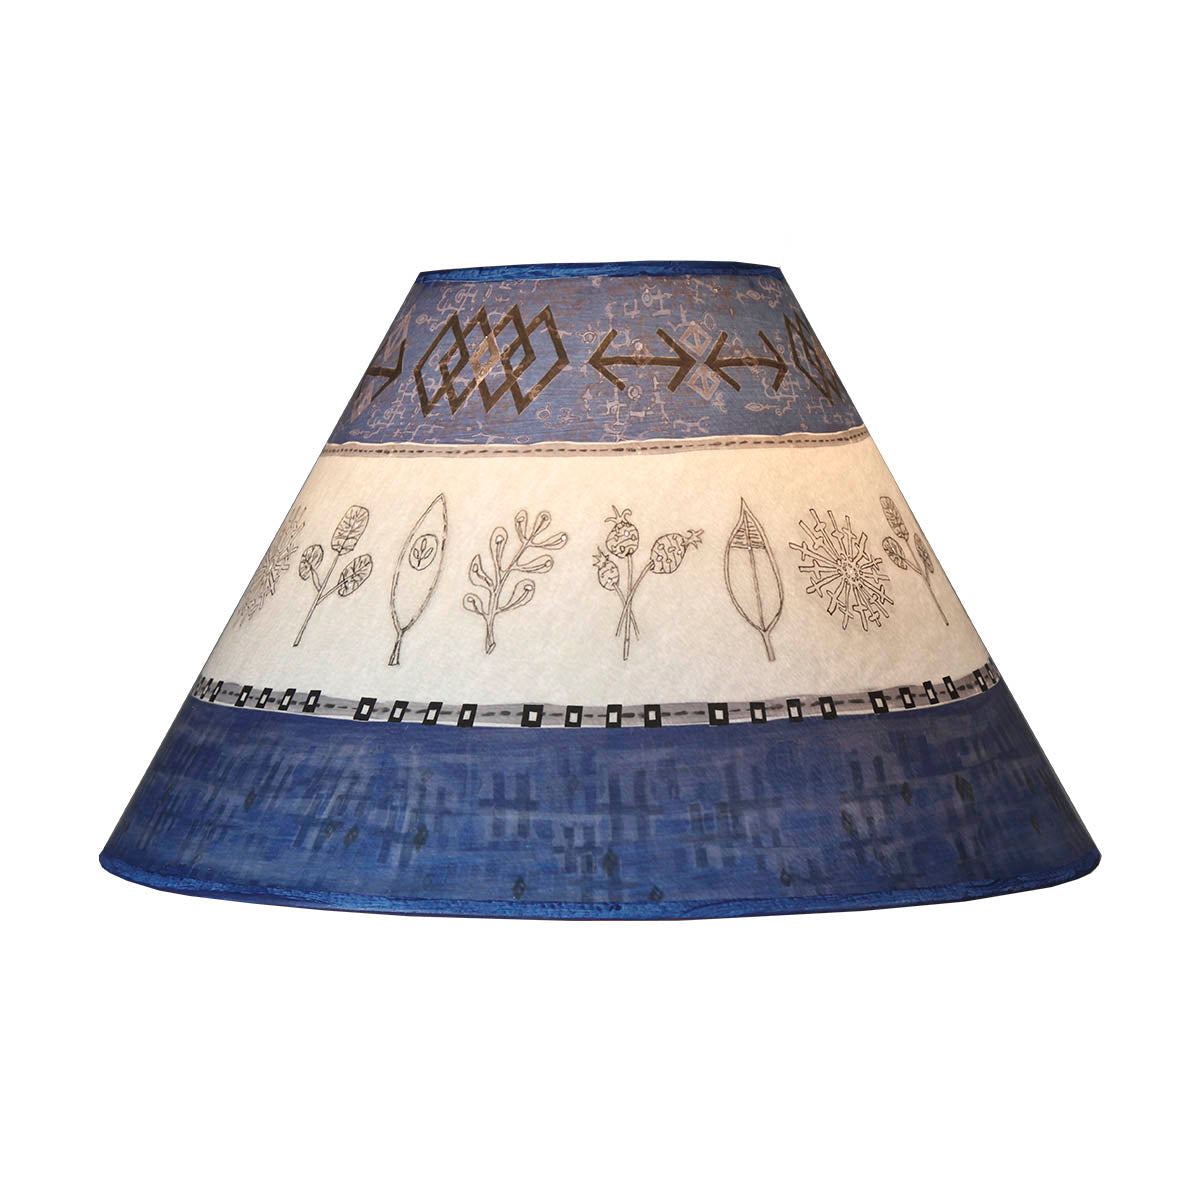 Janna Ugone & Co Lamp Shades Medium Conical Lamp Shade in Woven & Sprig in Sapphire